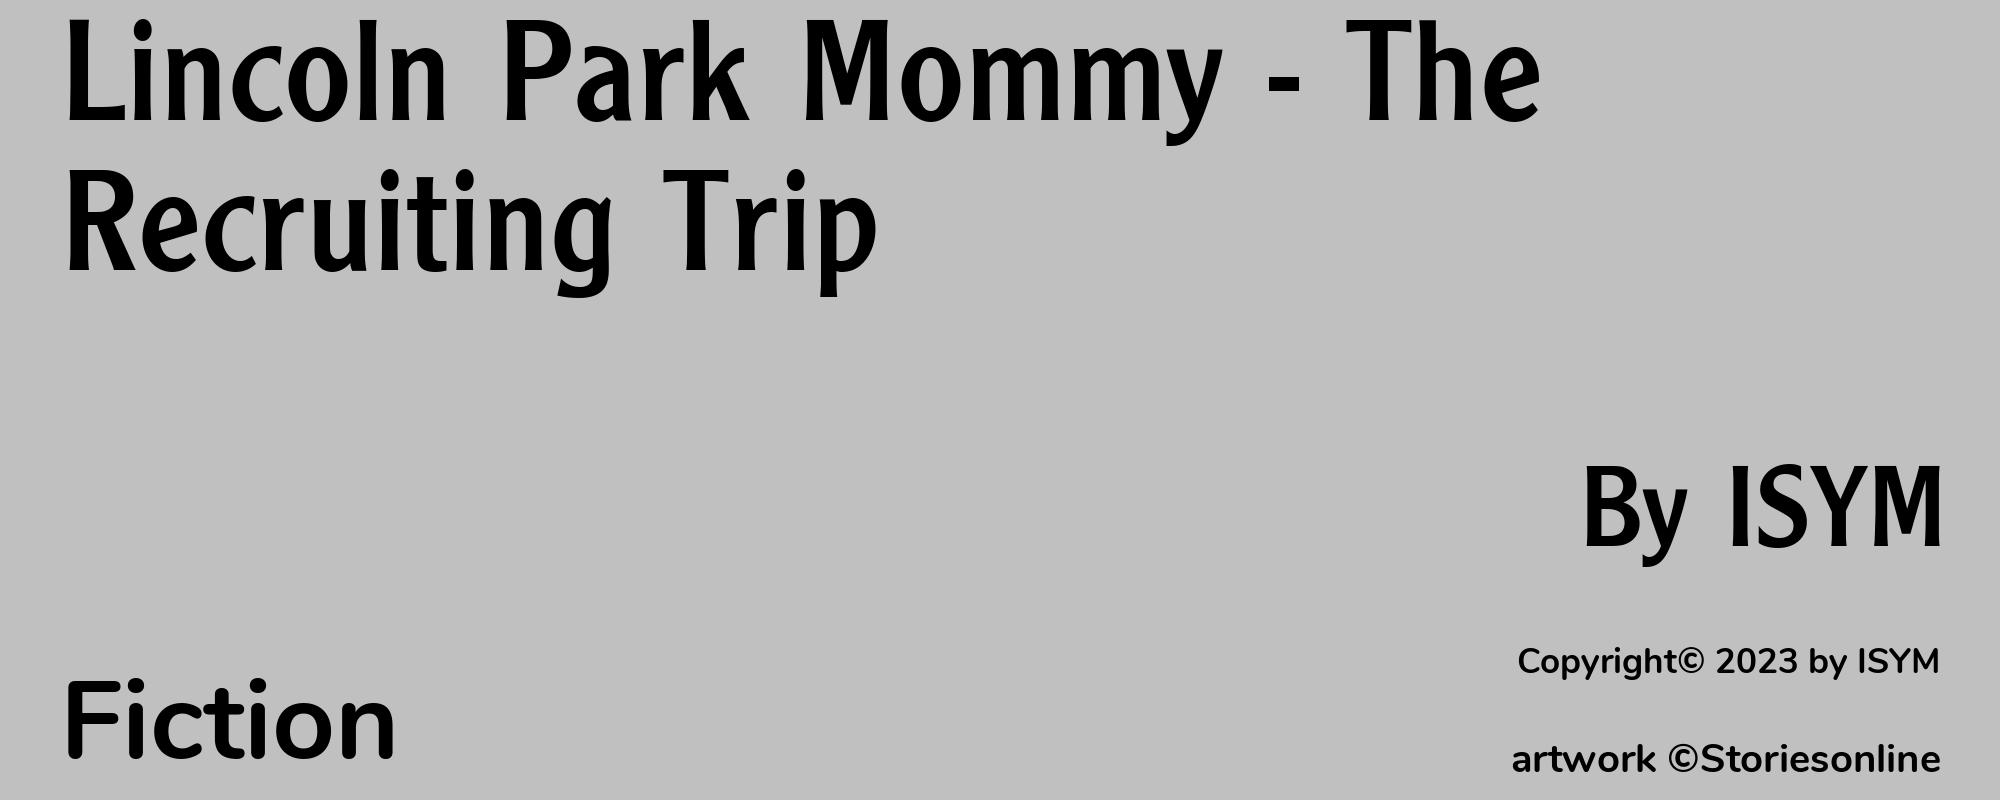 Lincoln Park Mommy - The Recruiting Trip - Cover